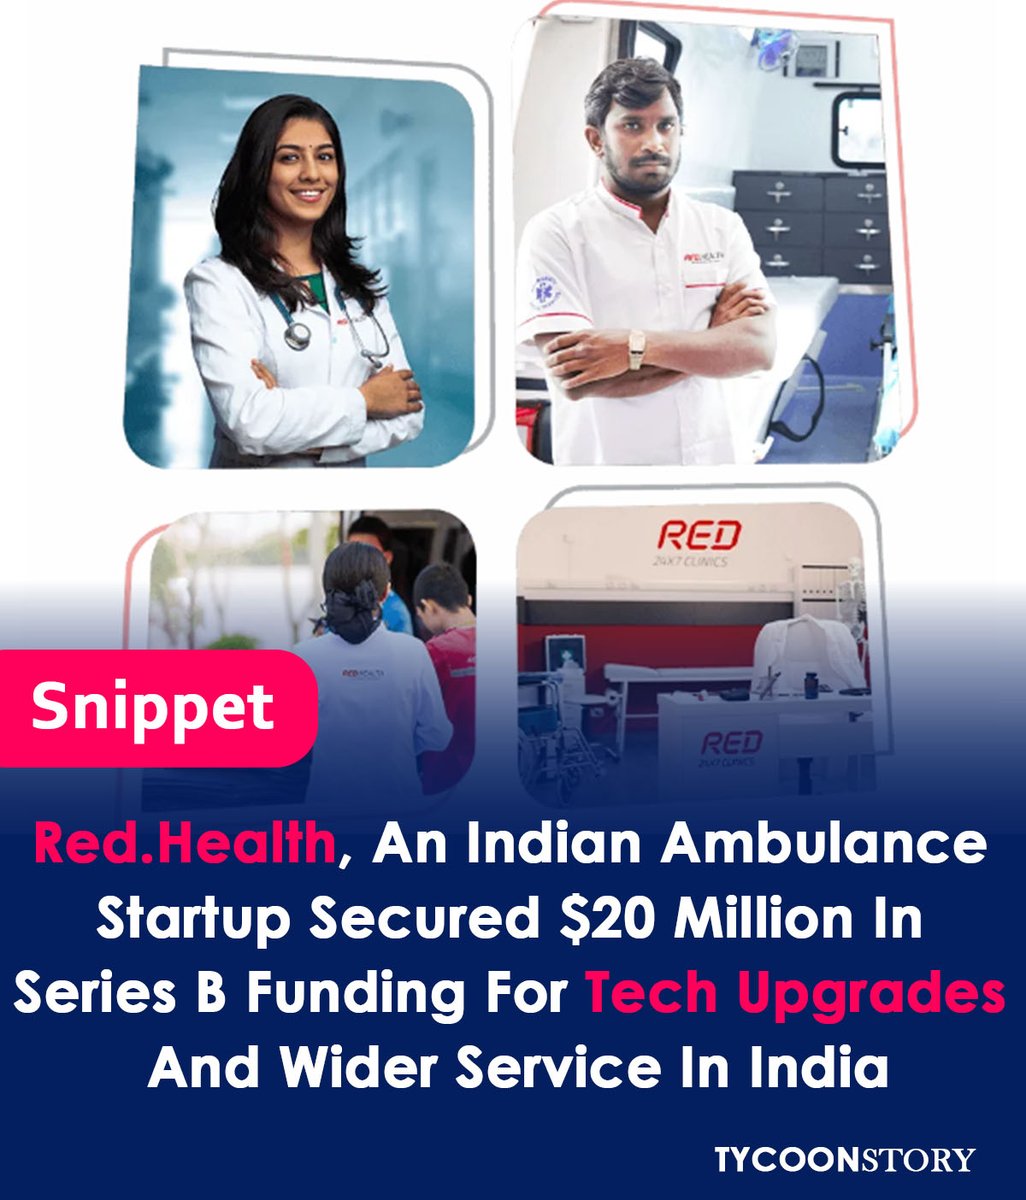 Red.Health Bounces Back with $20 Million Series B Funding
#RedHealth #HealthTech #EmergencyResponse #FundingBoost #India #AI #Ambulance #healthcare #SubscriptionHealthcare #GrowthGoals #emergencyservices @theredhealth @singhofstanplus 
tycoonstory.com